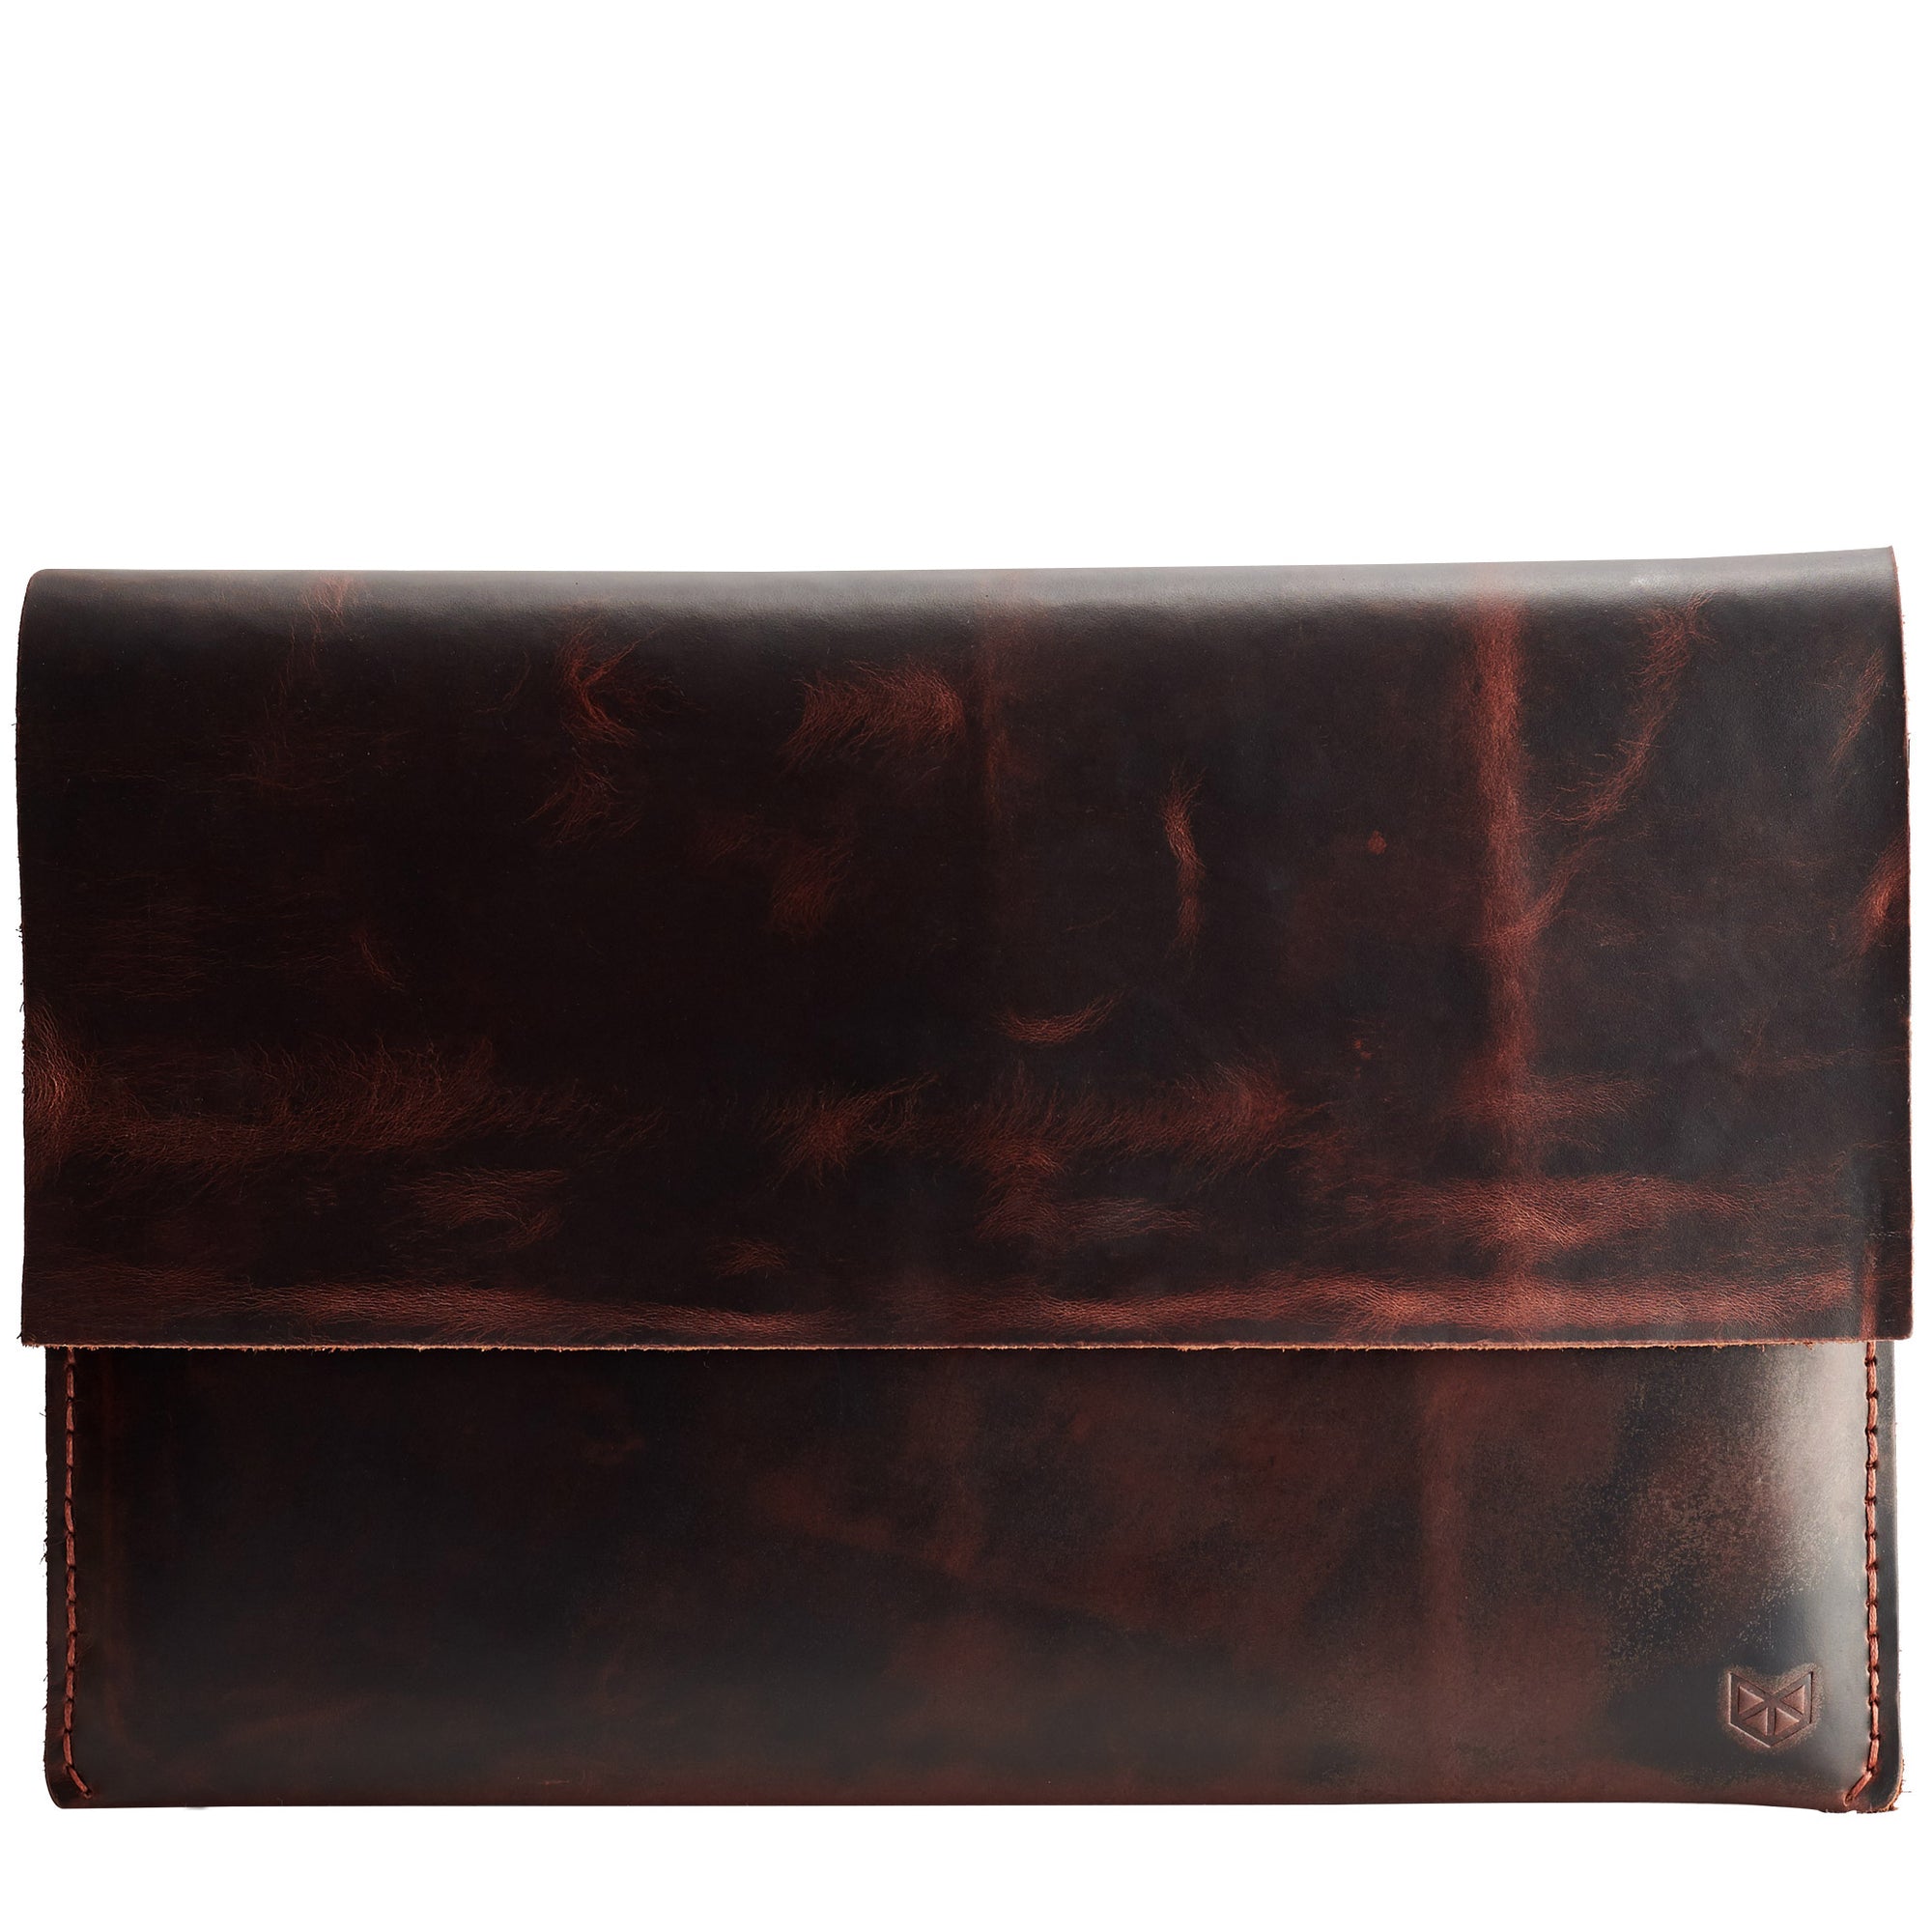 Leather Lenovo Yoga Red Brown Sleeve Case by Capra Leather